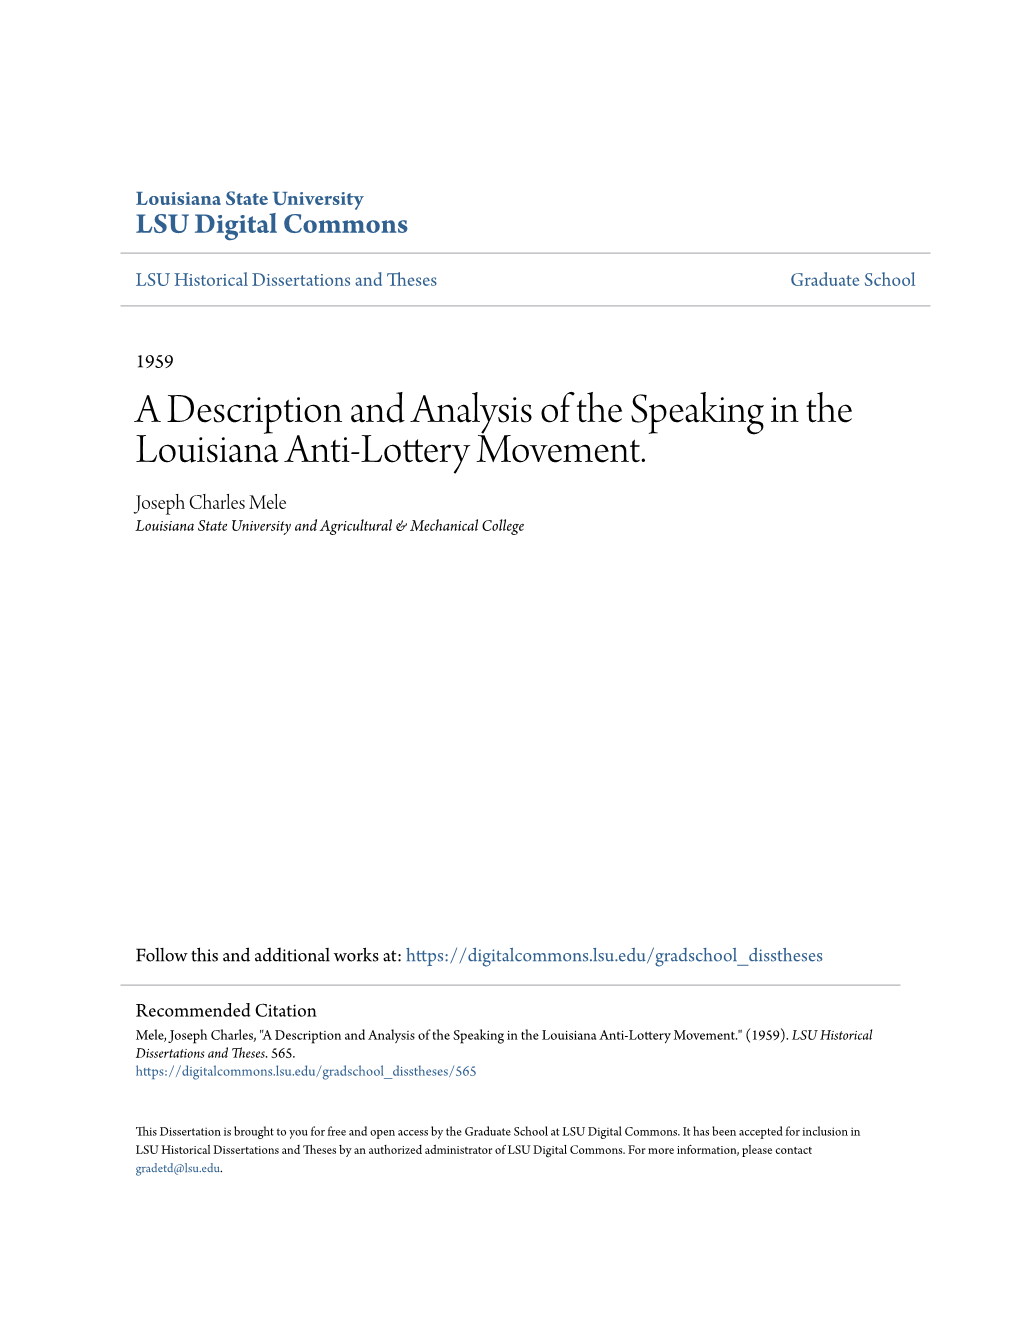 A Description and Analysis of the Speaking in the Louisiana Anti-Lottery Movement